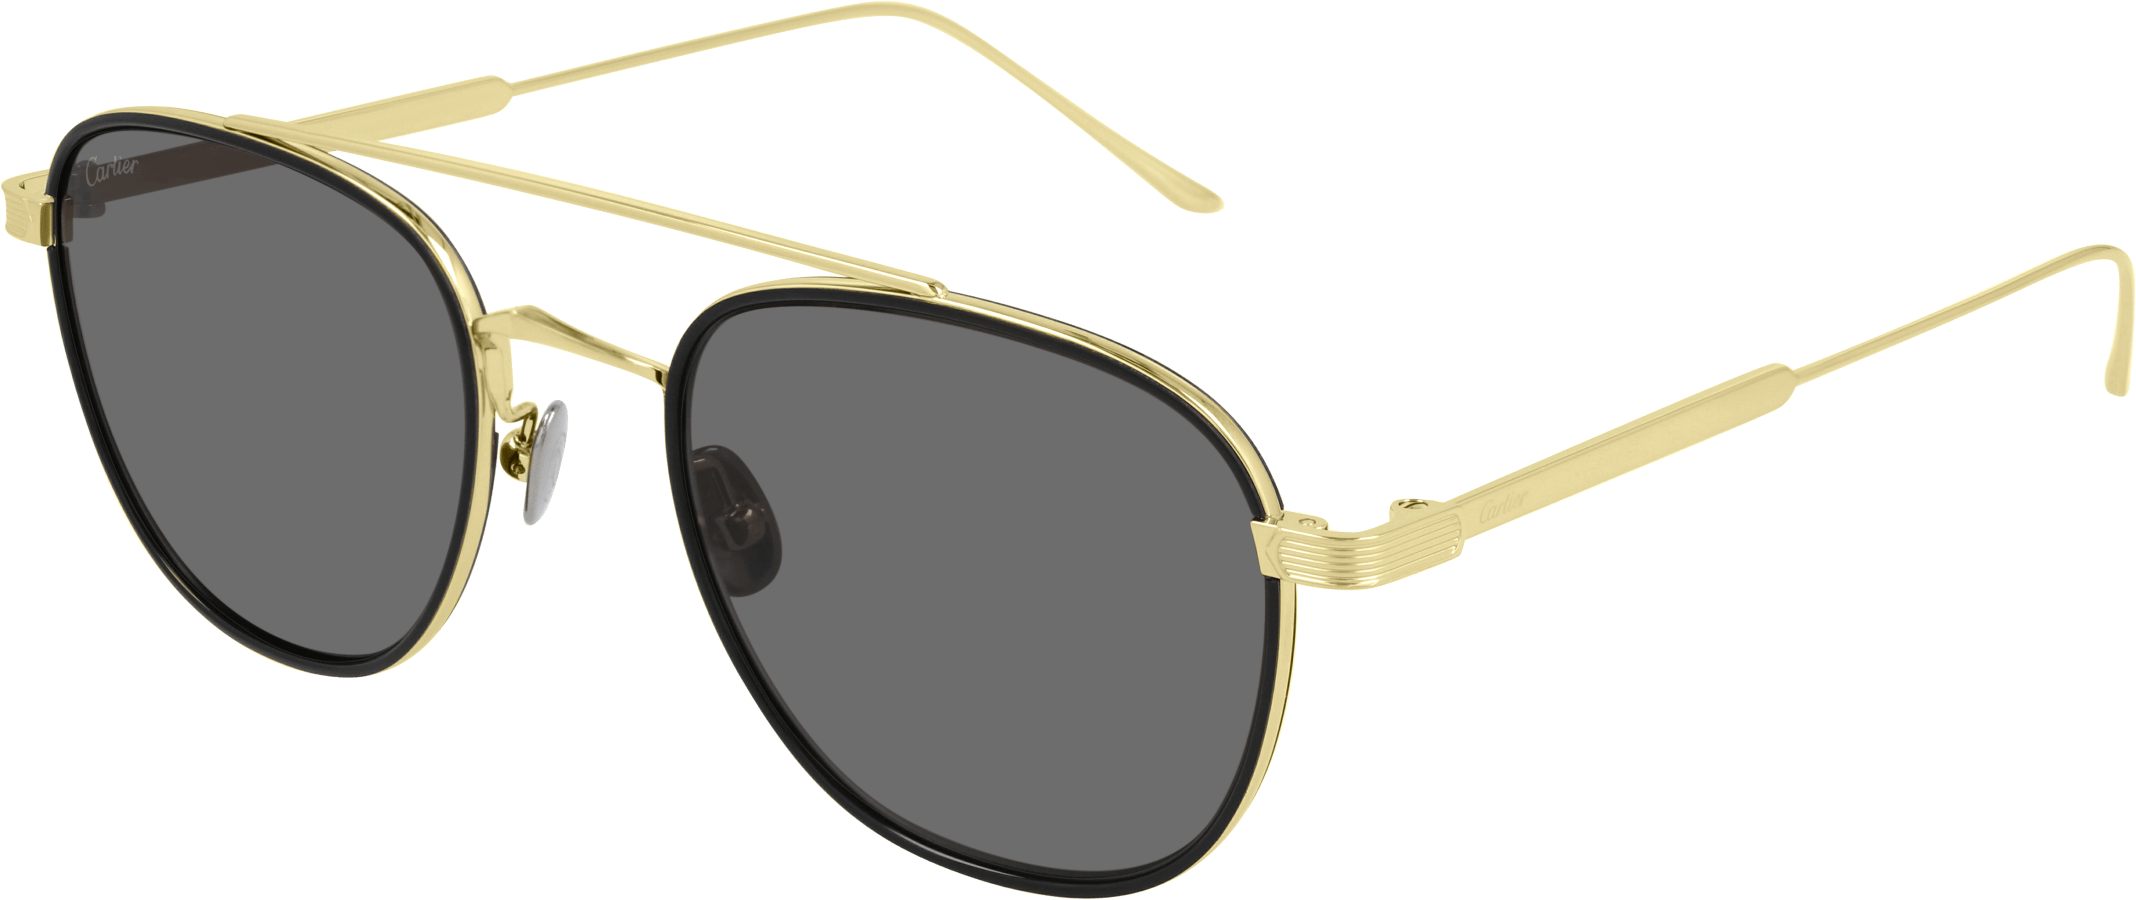 Color_CT0251S-001 - GOLD - GREY - AR (ANTI REFLECTIVE)